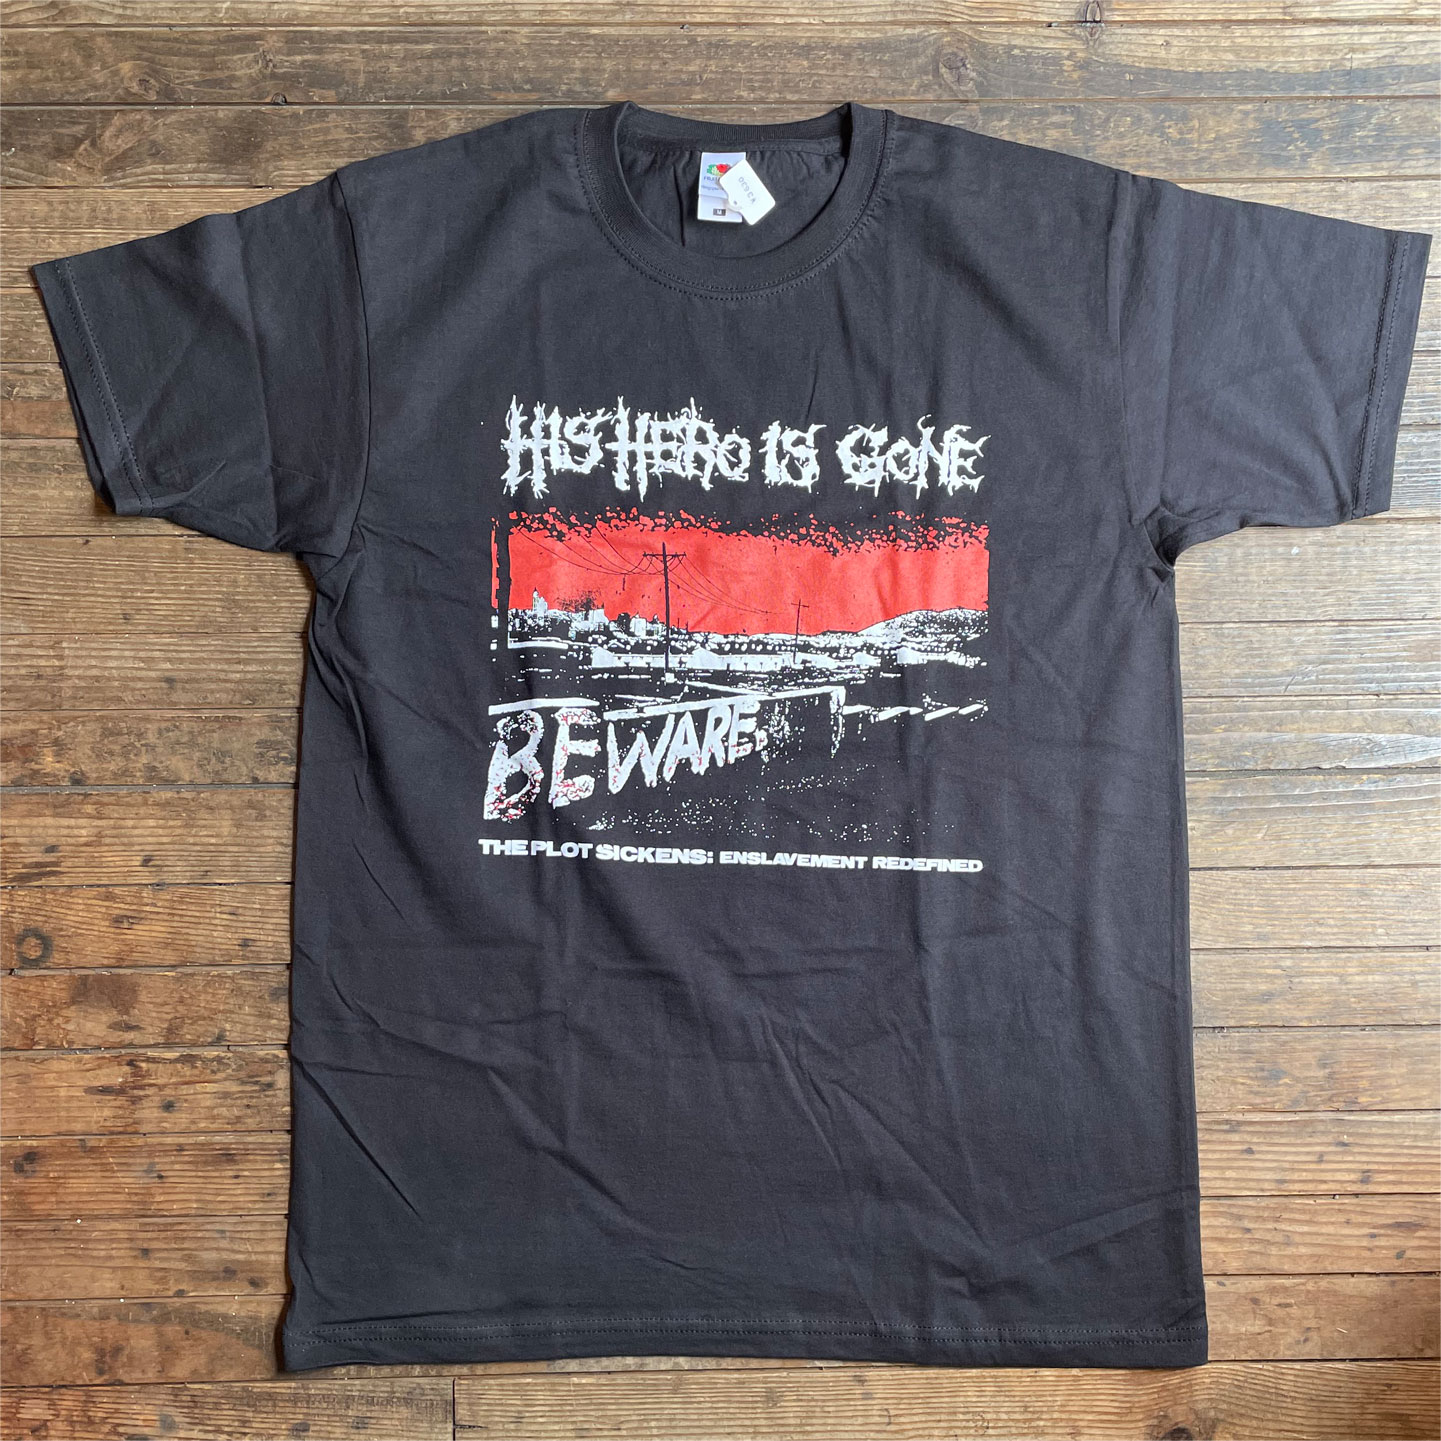 HIS HERO IS GONE Tシャツ The Plot Sickens: Enslavement Redefined